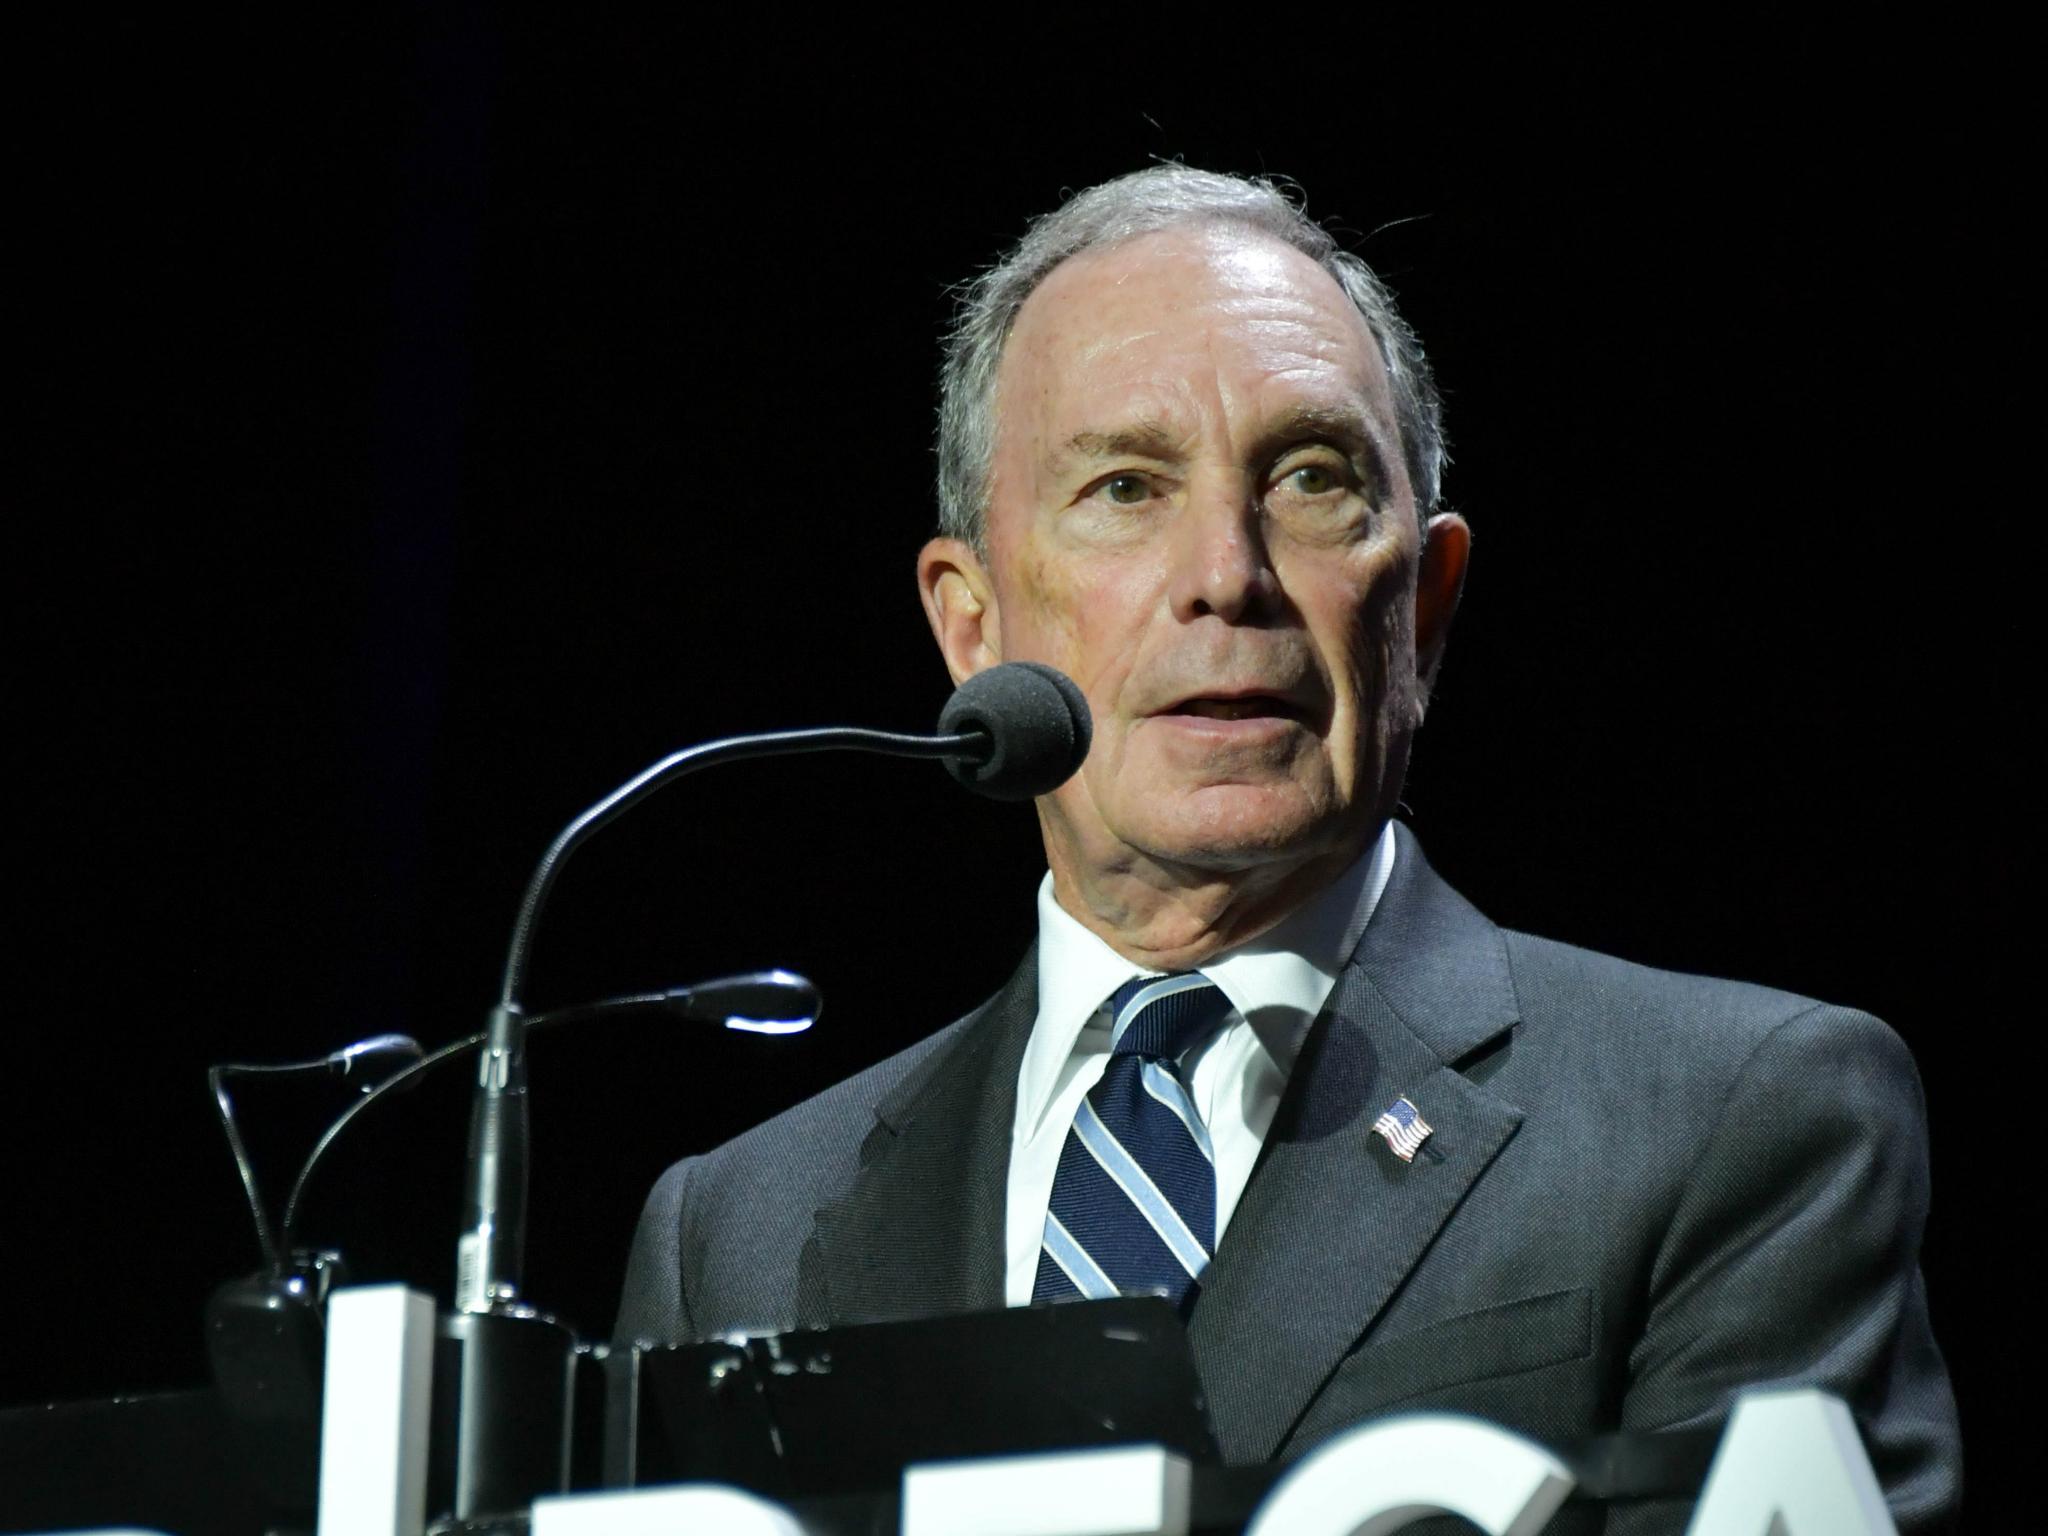 Former New York City Mayor Mike Bloomberg says Donald Trump's denial of climate change makes the US look 'foolish'